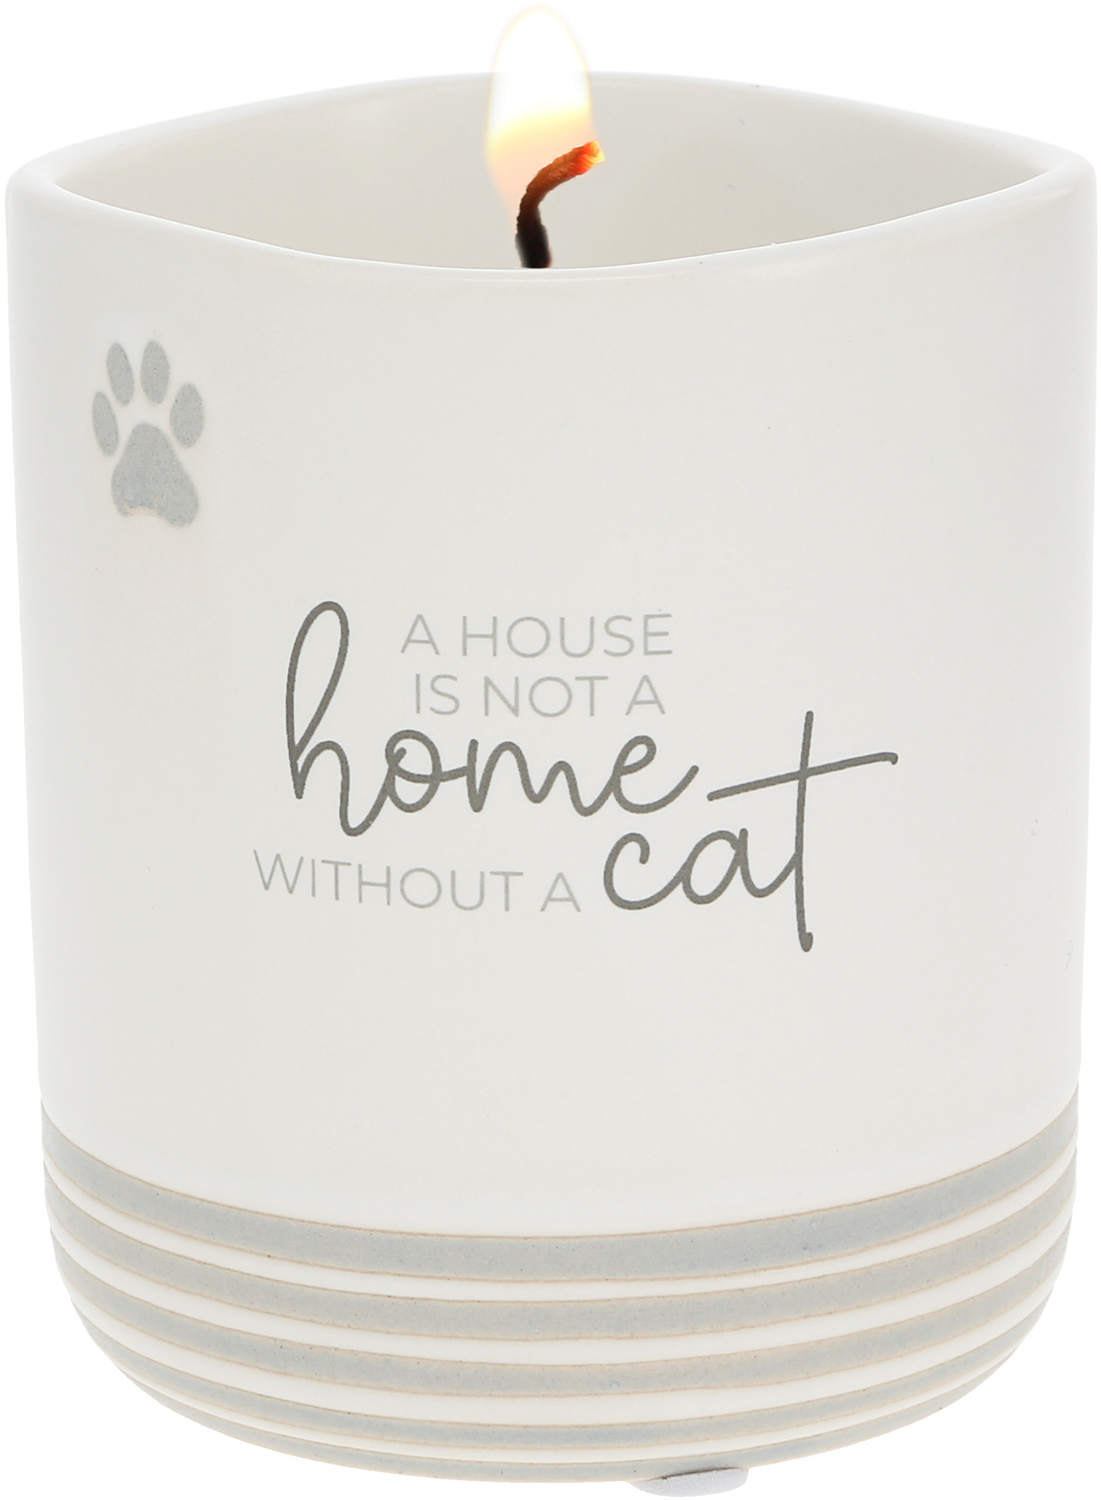 Home - Cat by Furever Pawsome - Home - Cat - 10 oz - 100% Soy Wax Reveal Candle
Scent: Tranquility